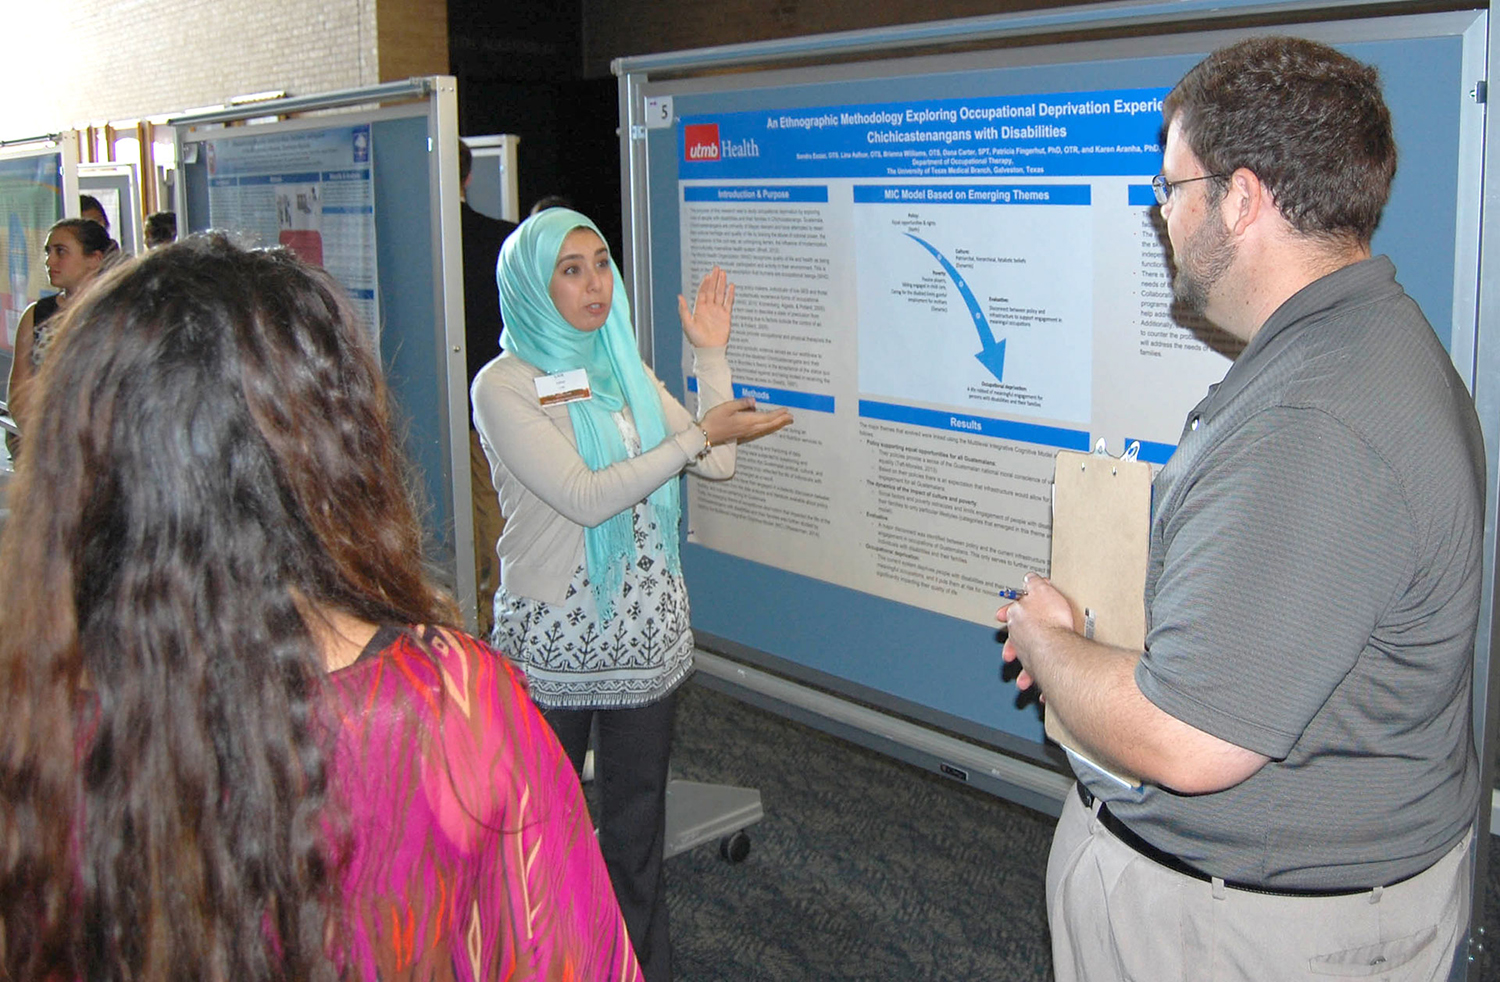 Lina Asfoor, graduate student in Occupational Therapy at UTMB, describes her team’s poster to a judge during the fourth annual Global Health Education Symposium. The team’s poster topic was “An Ethnographic Methodology Exploring Occupational Deprivation Experienced by Chichicastenangans with Disabilities.”